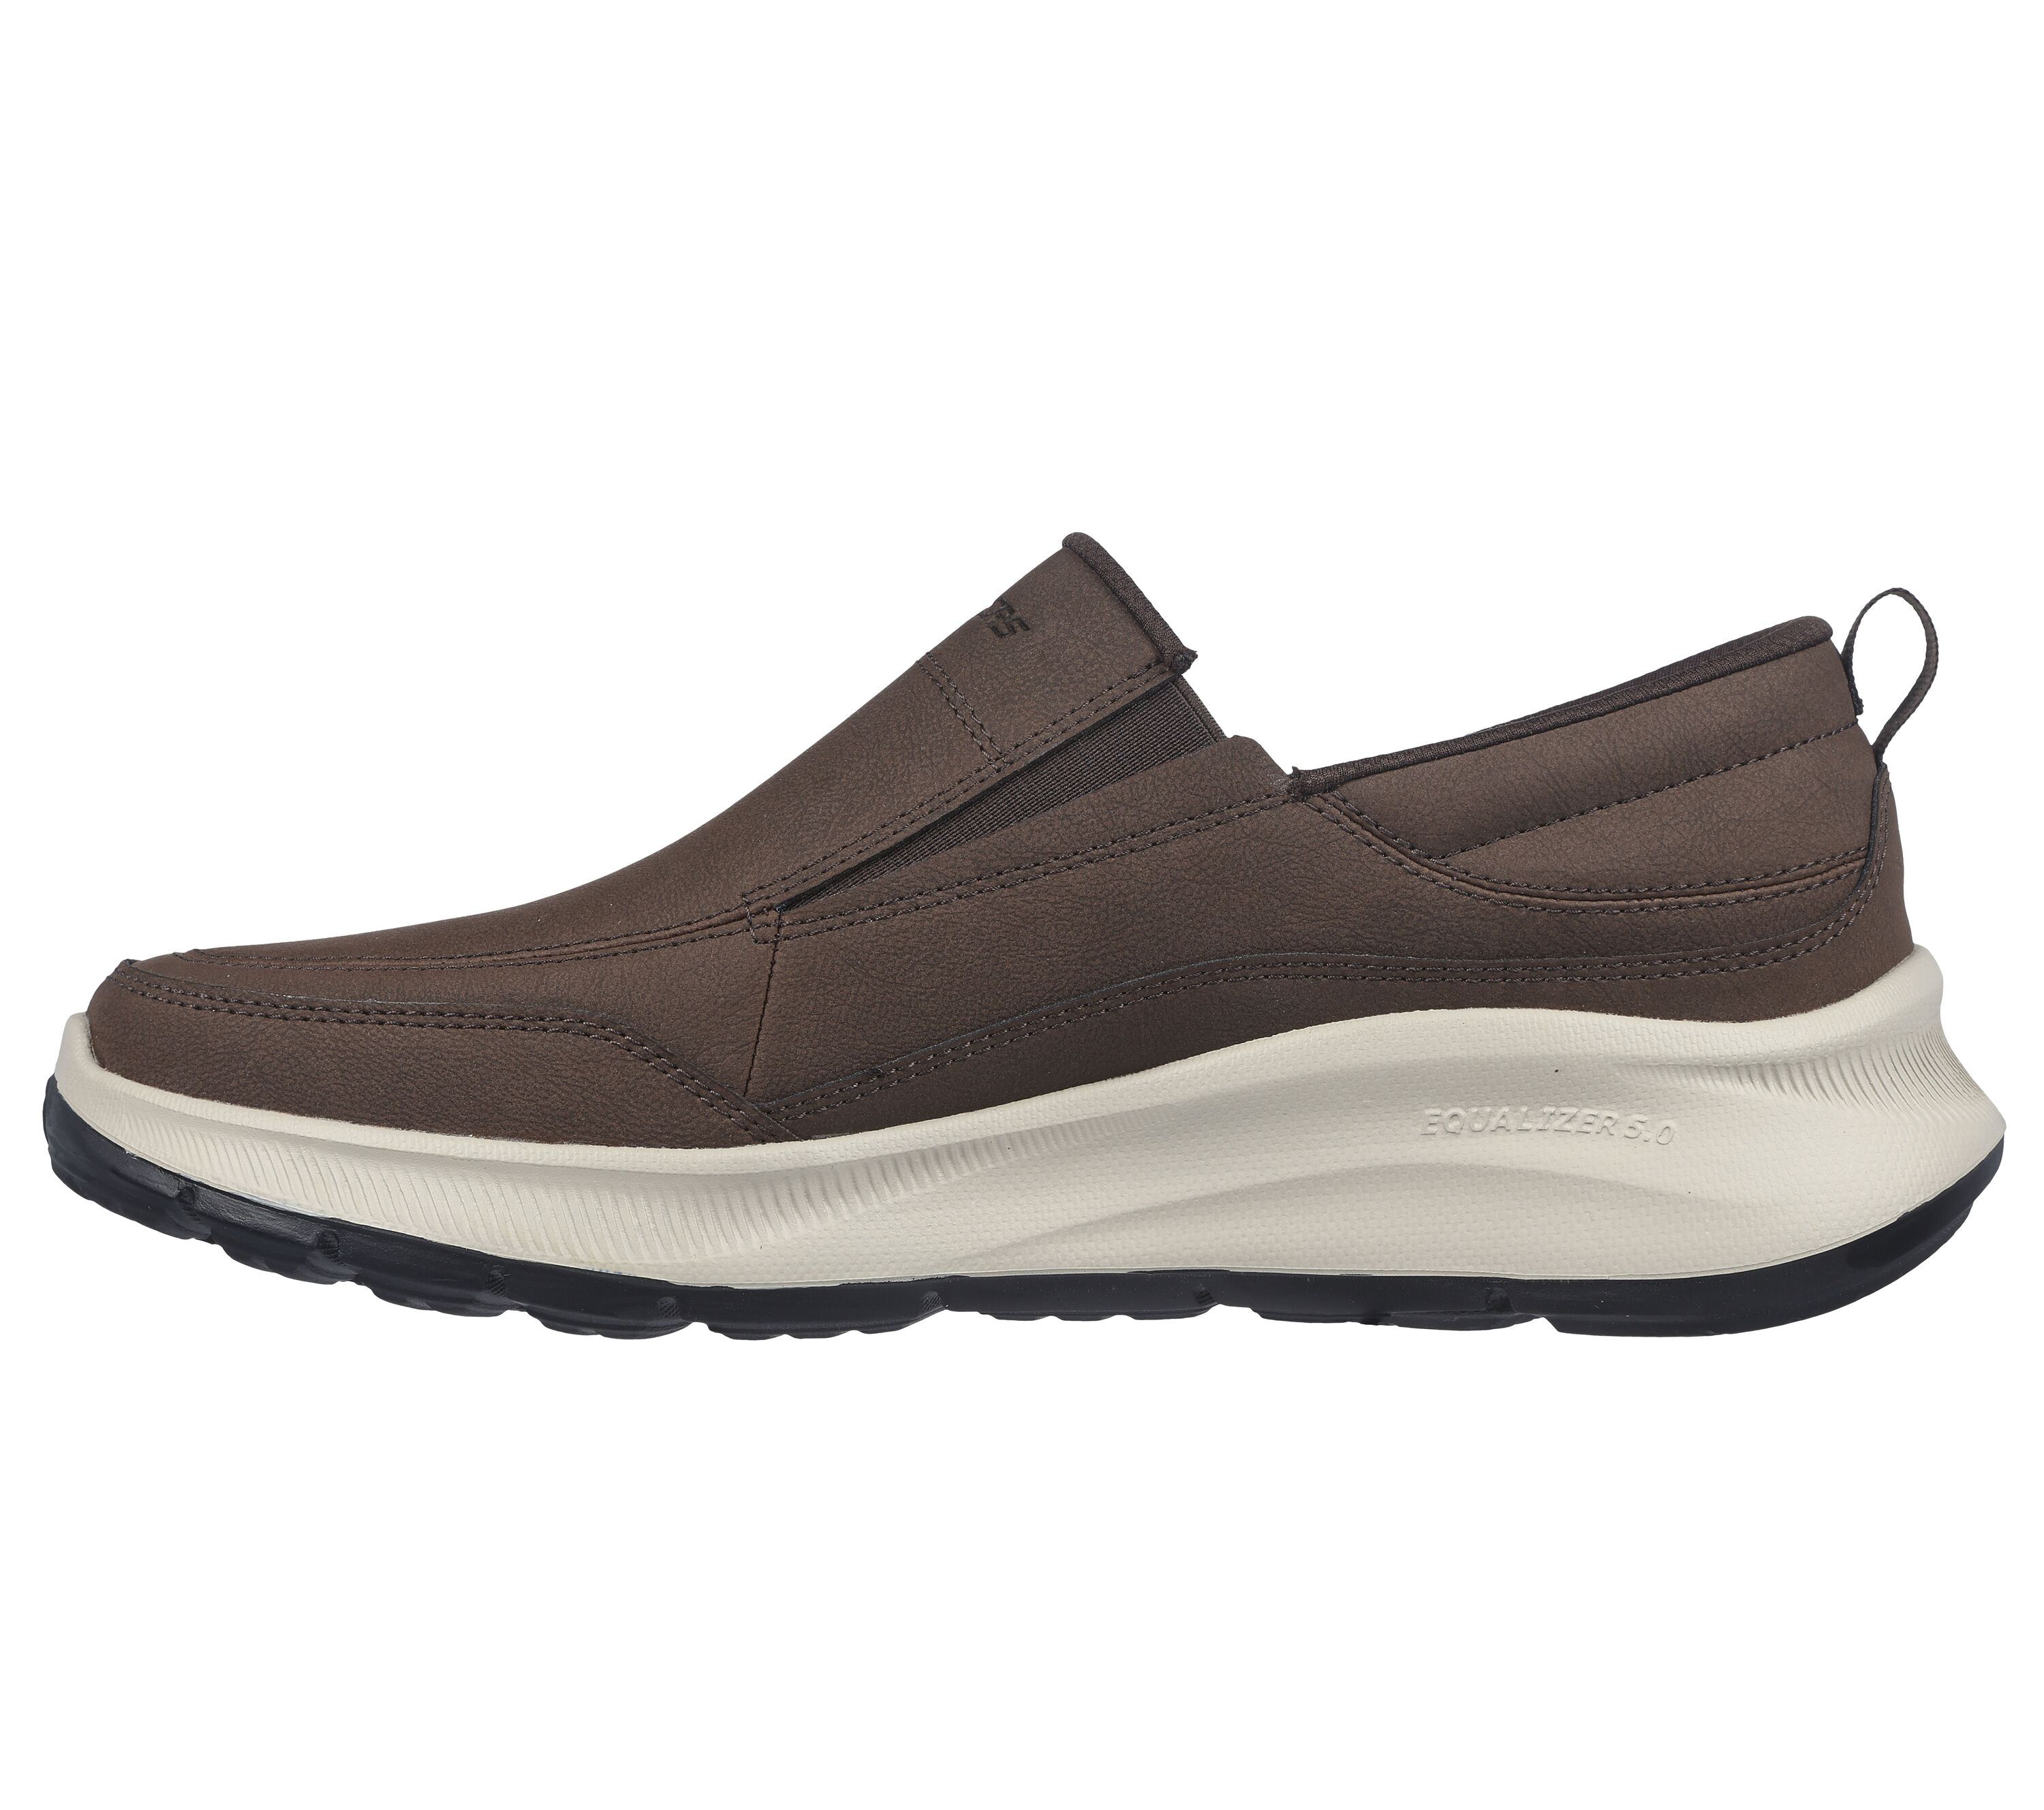 Shop the Relaxed Fit: Equalizer 5.0 - Harvey | SKECHERS CA